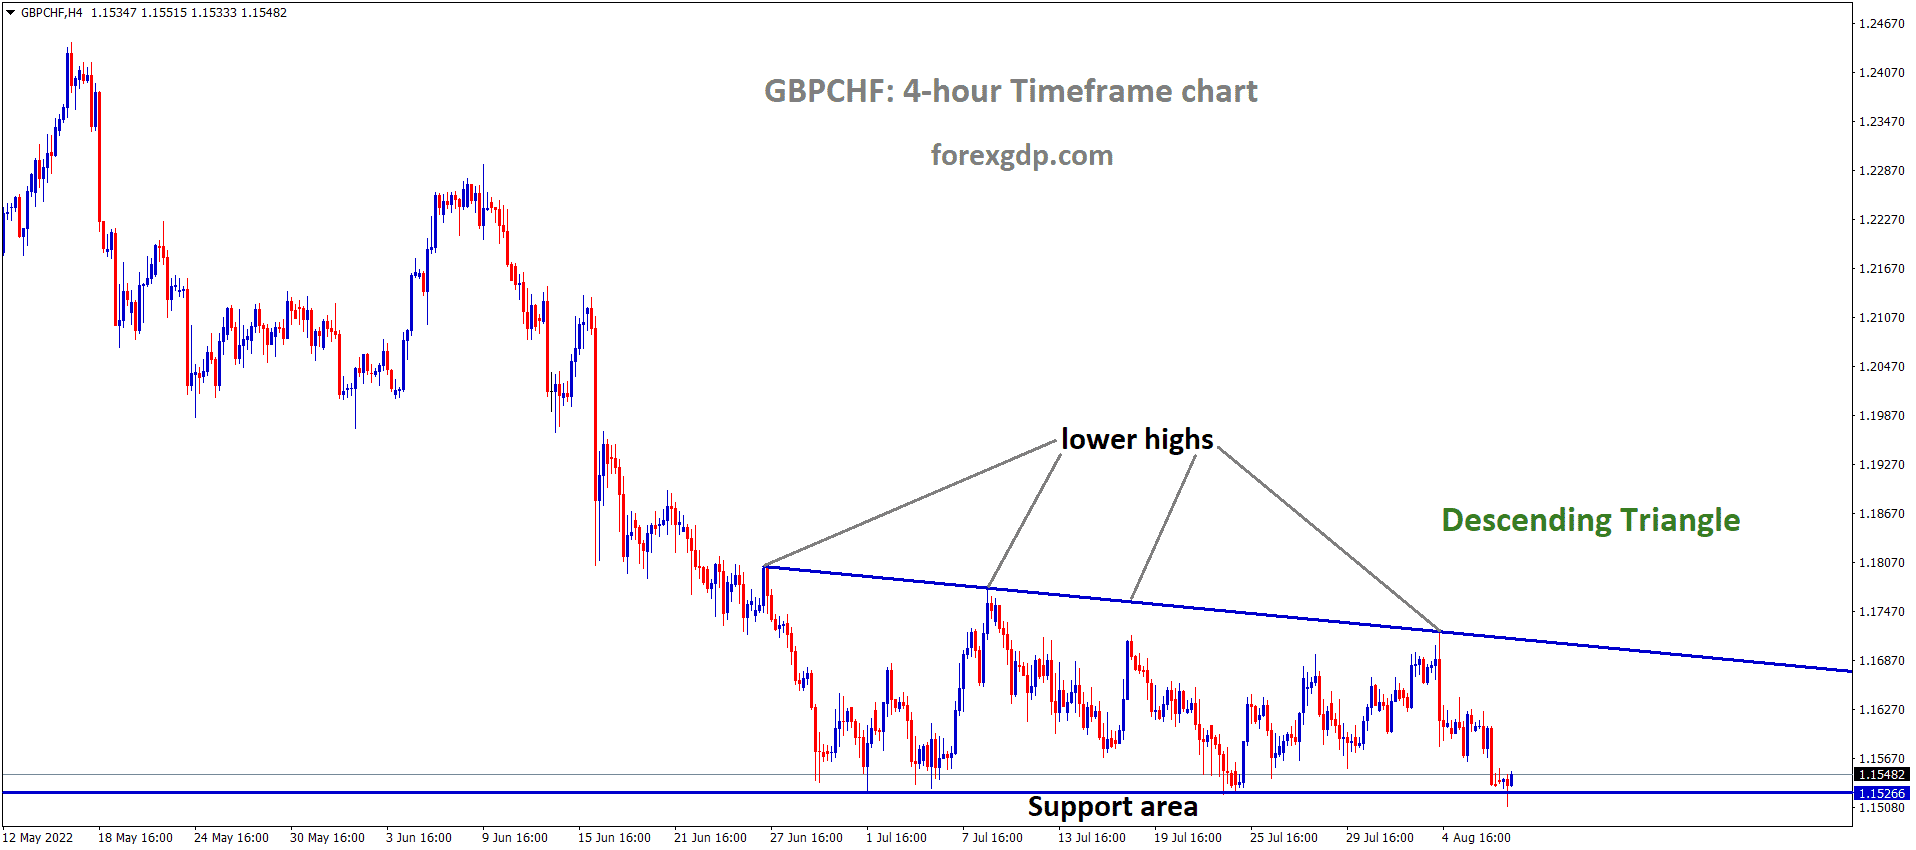 GBPCHF is moving in the Descending triangle pattern and the Market has rebounded from the horizontal support area of the pattern